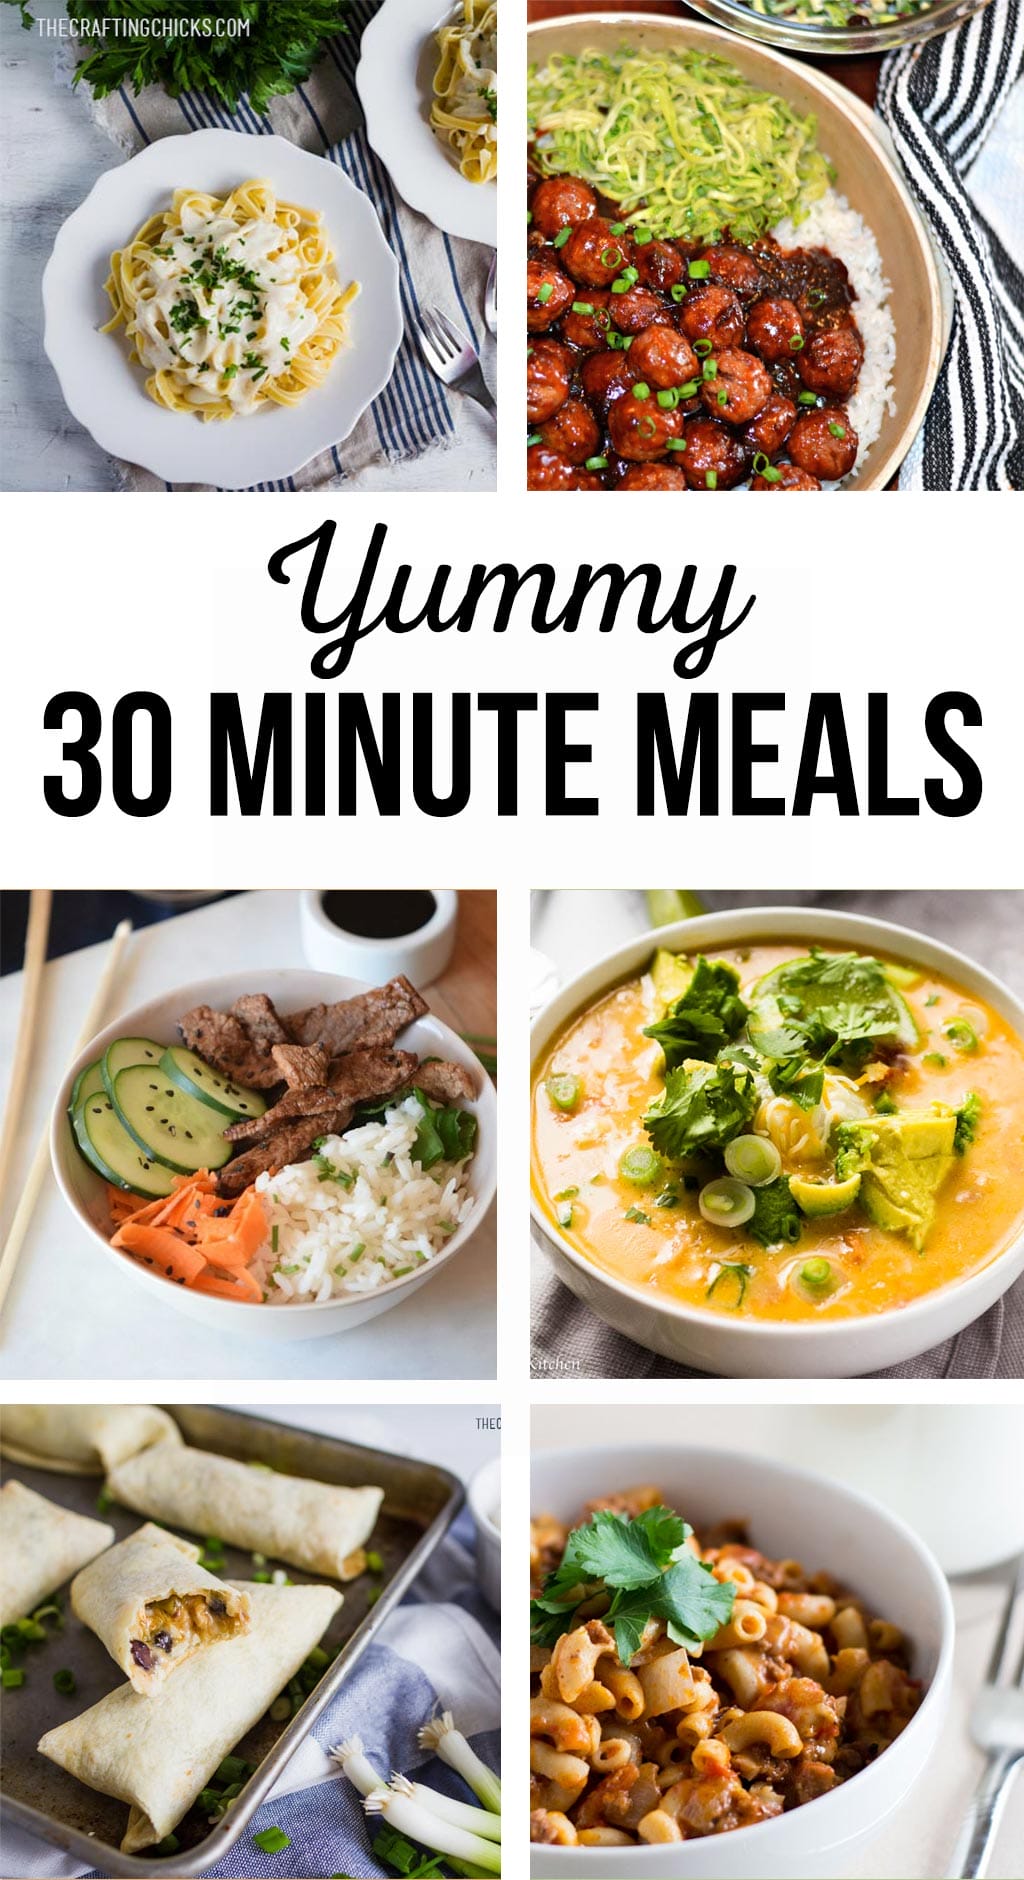 30 Minute Meals | Quick and easy recipes for your busy schedule. Great for after work or in between soccer games. Meals the whole family will love! #30minutemeals